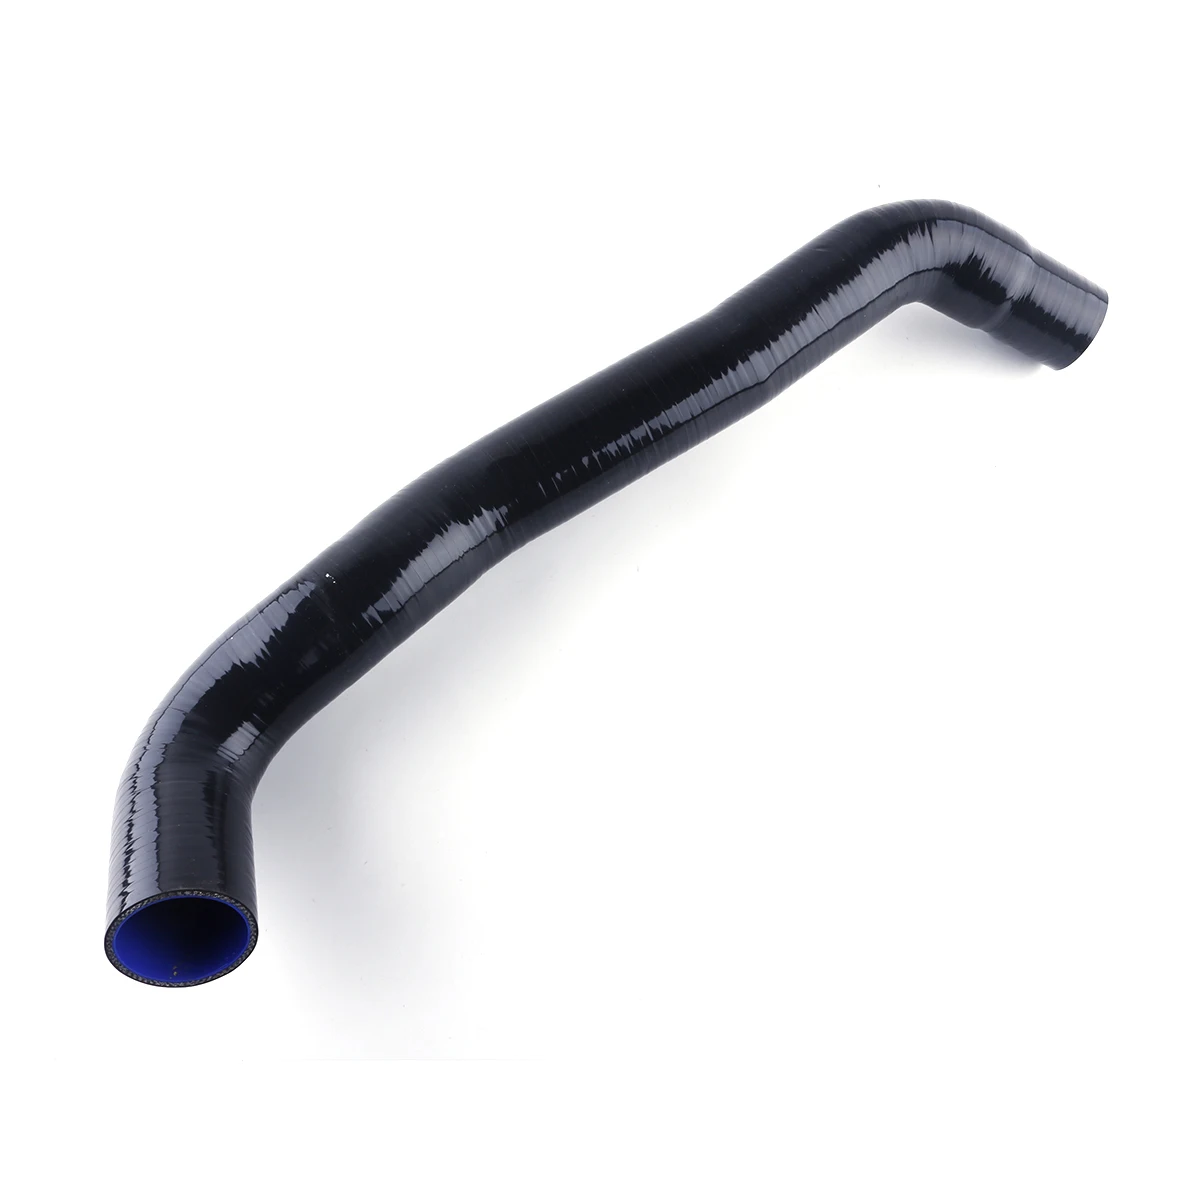 

For Land Rover Discovery 3 & 4 2.7 TDV6 / MK4 2.7 TD 2009-2016 / 2.7 TDVM 4x4 LS 2005-2013 Silicone Hose Intercooler Turbo Pipe